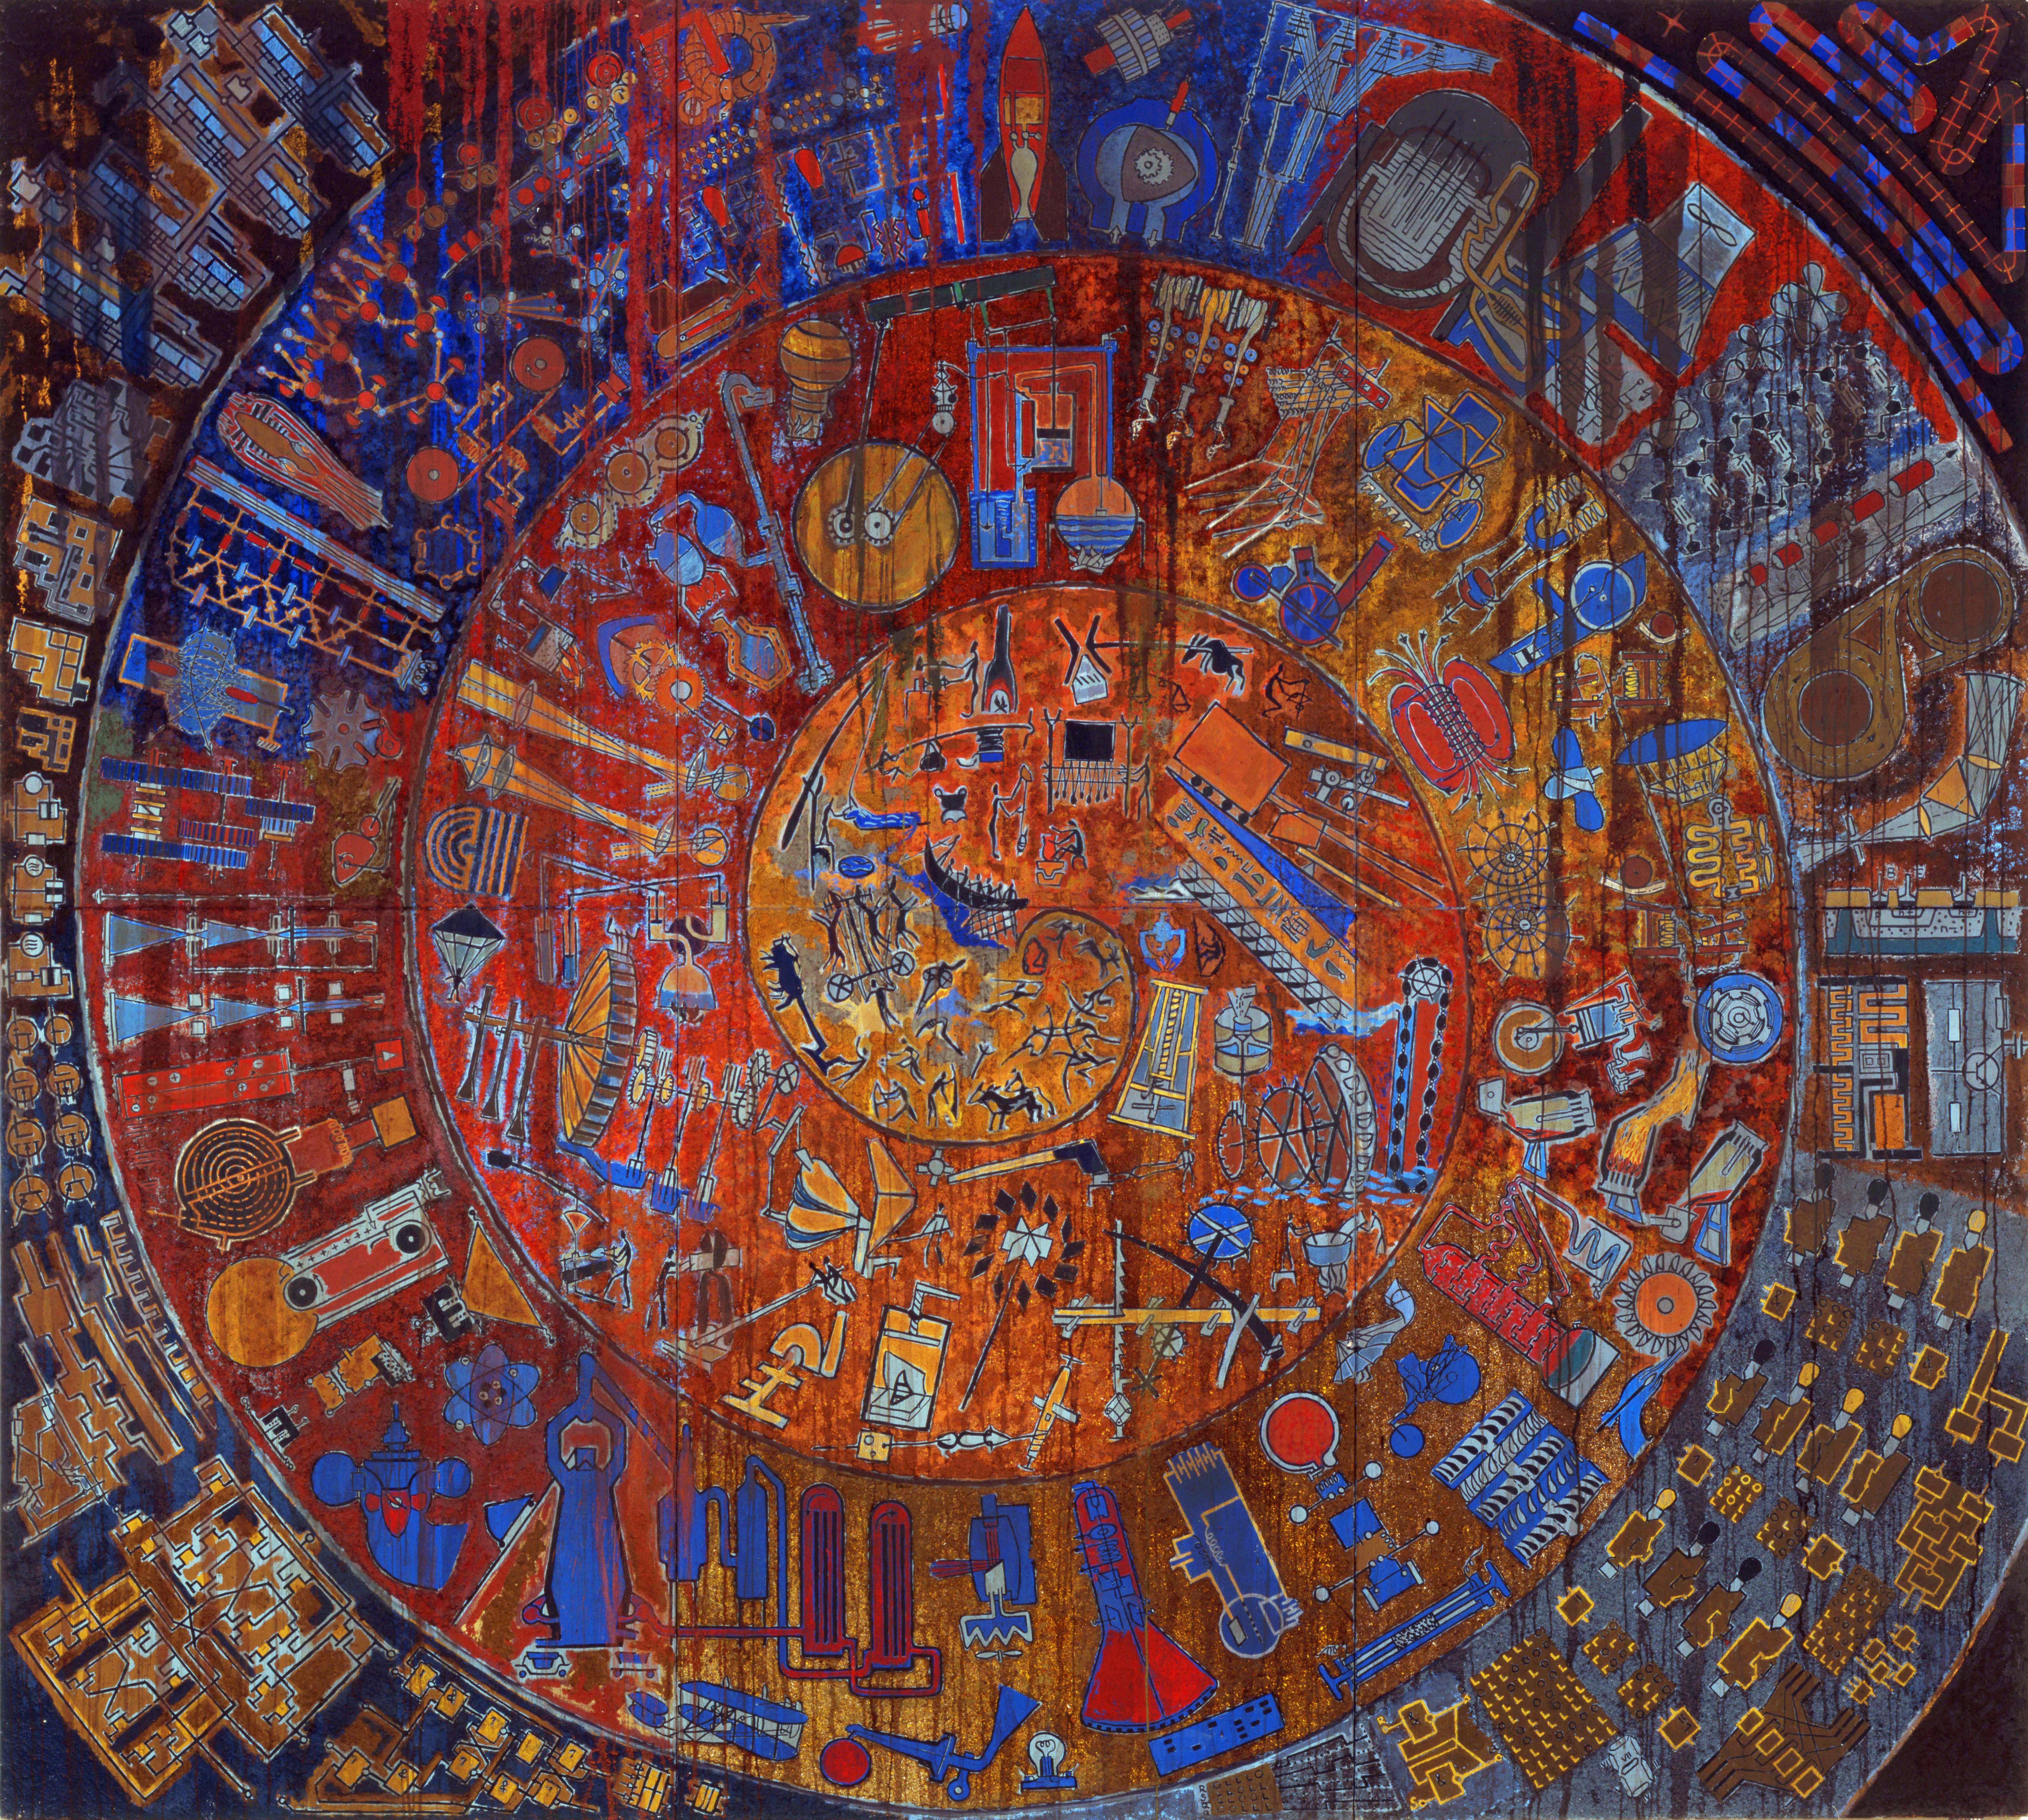 Hannes  Hofstetter: 'brave new world ii', 1994 Other Painting, Technology. Hannes Hofstetter  Brave New World IIaEURoe, 1993270 x 300 cm, mixed media on canvas, for transport 6 Parts , 135 x 100cmEVOLUTION OF TECHNOLOGY  acceleration Hand ax, spear, bow and arrow, digging stick, hoe, plow, ax, wheel, fishhook, harpoon, net, dugout, paddle, rudder, ladle irrigation, baler, hammer, anvil, pincers, ...